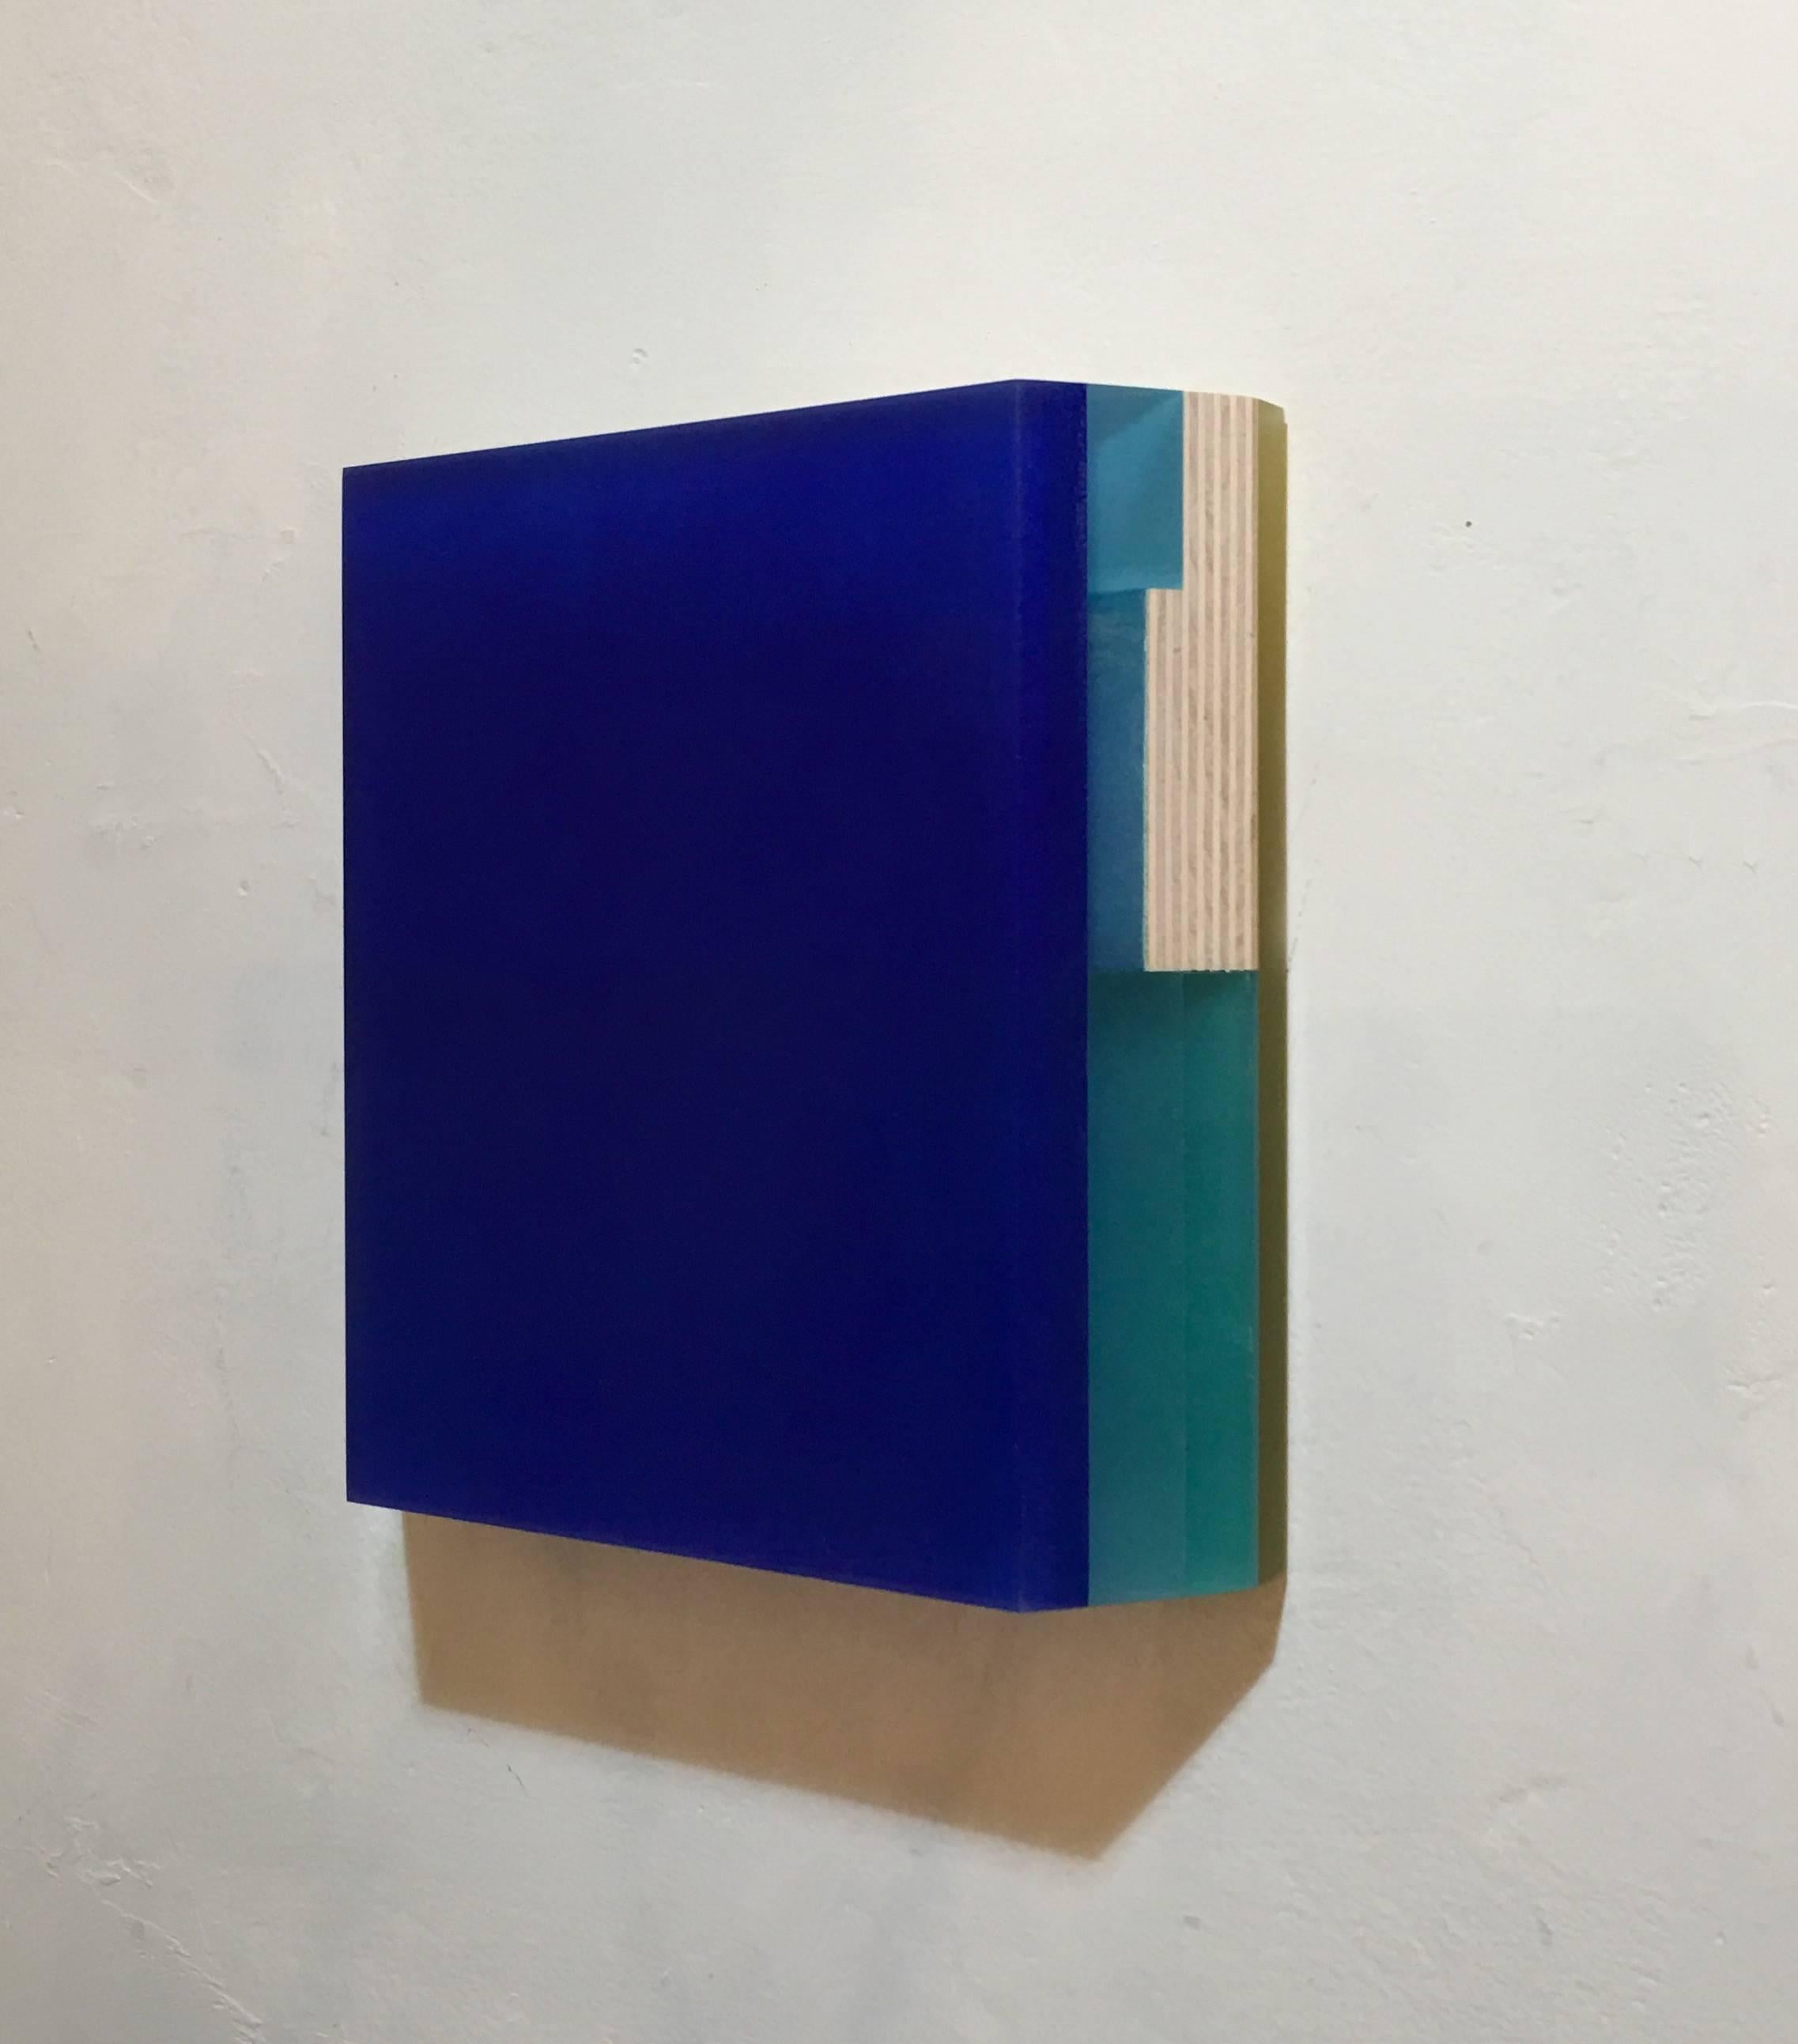 Untitled Blue 1- abstract geometric translucent wall sculpture - Sculpture by Michelle Benoit